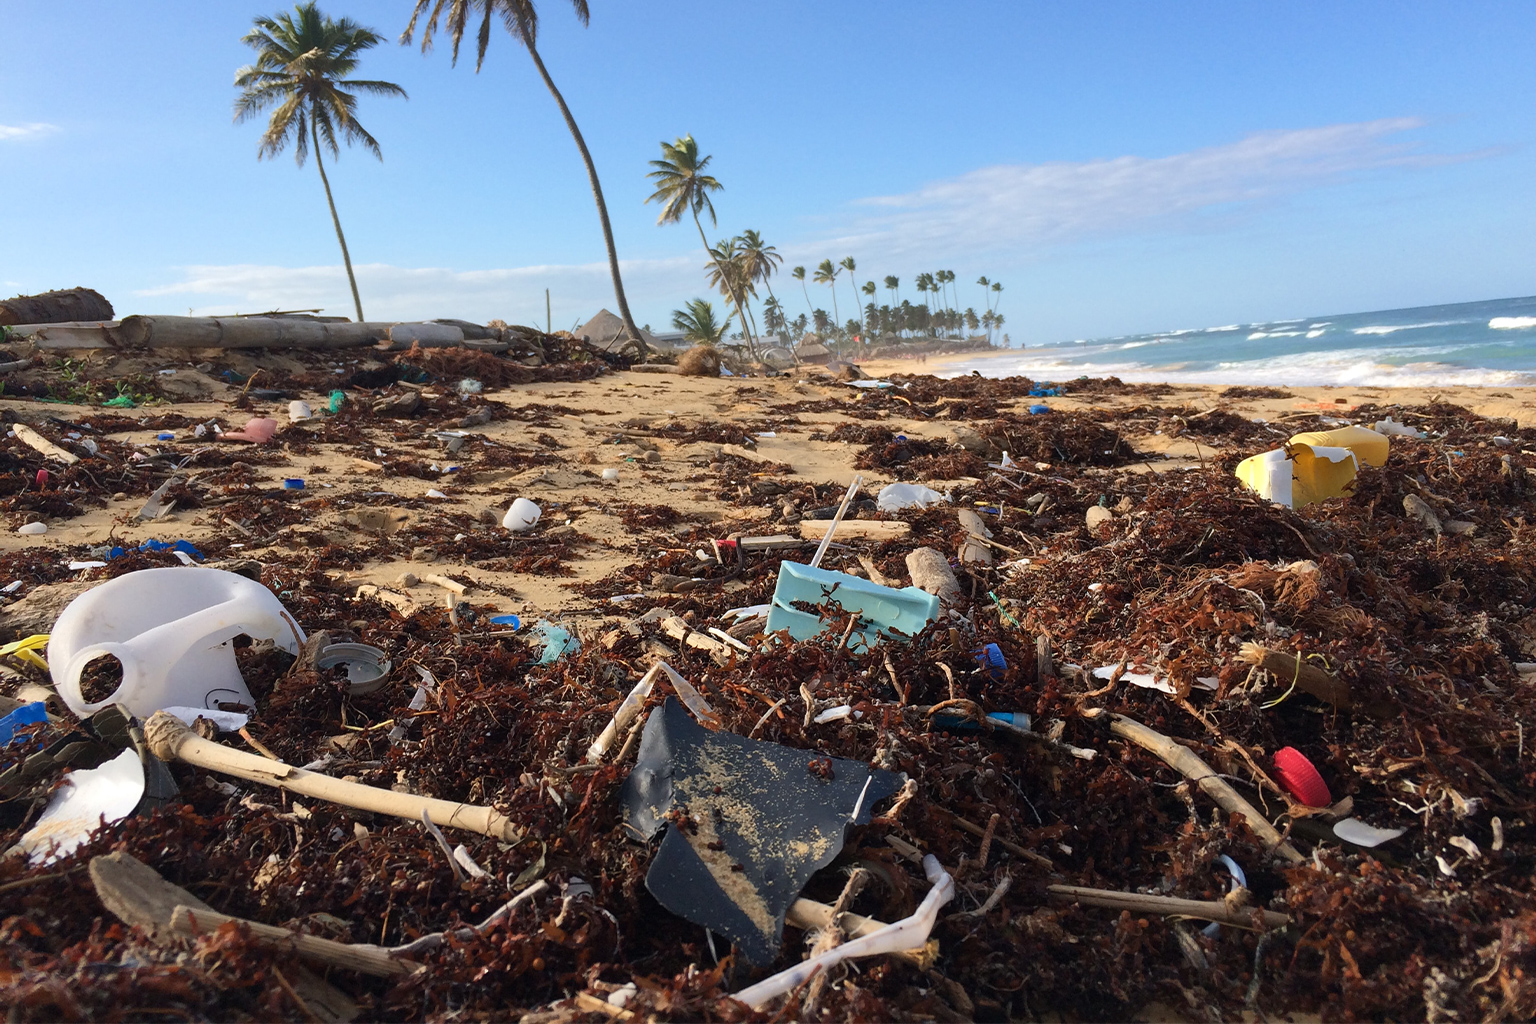 This tropical beach cluttered with plastic debris is only the tip of the global plastics iceberg. 